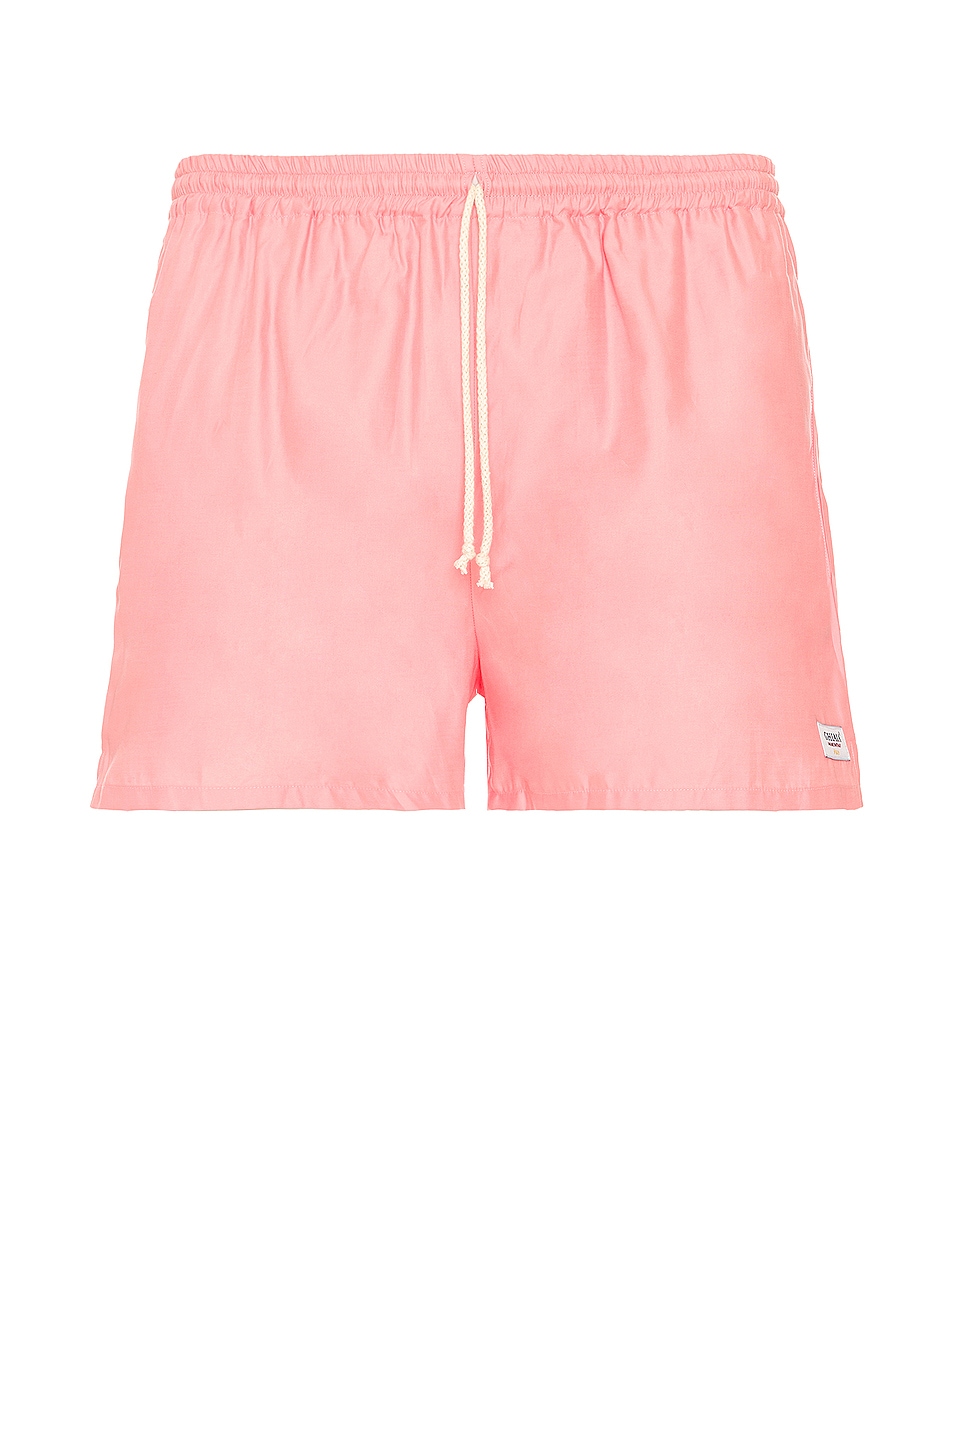 Cotton Mare Swim Shorts in Pink